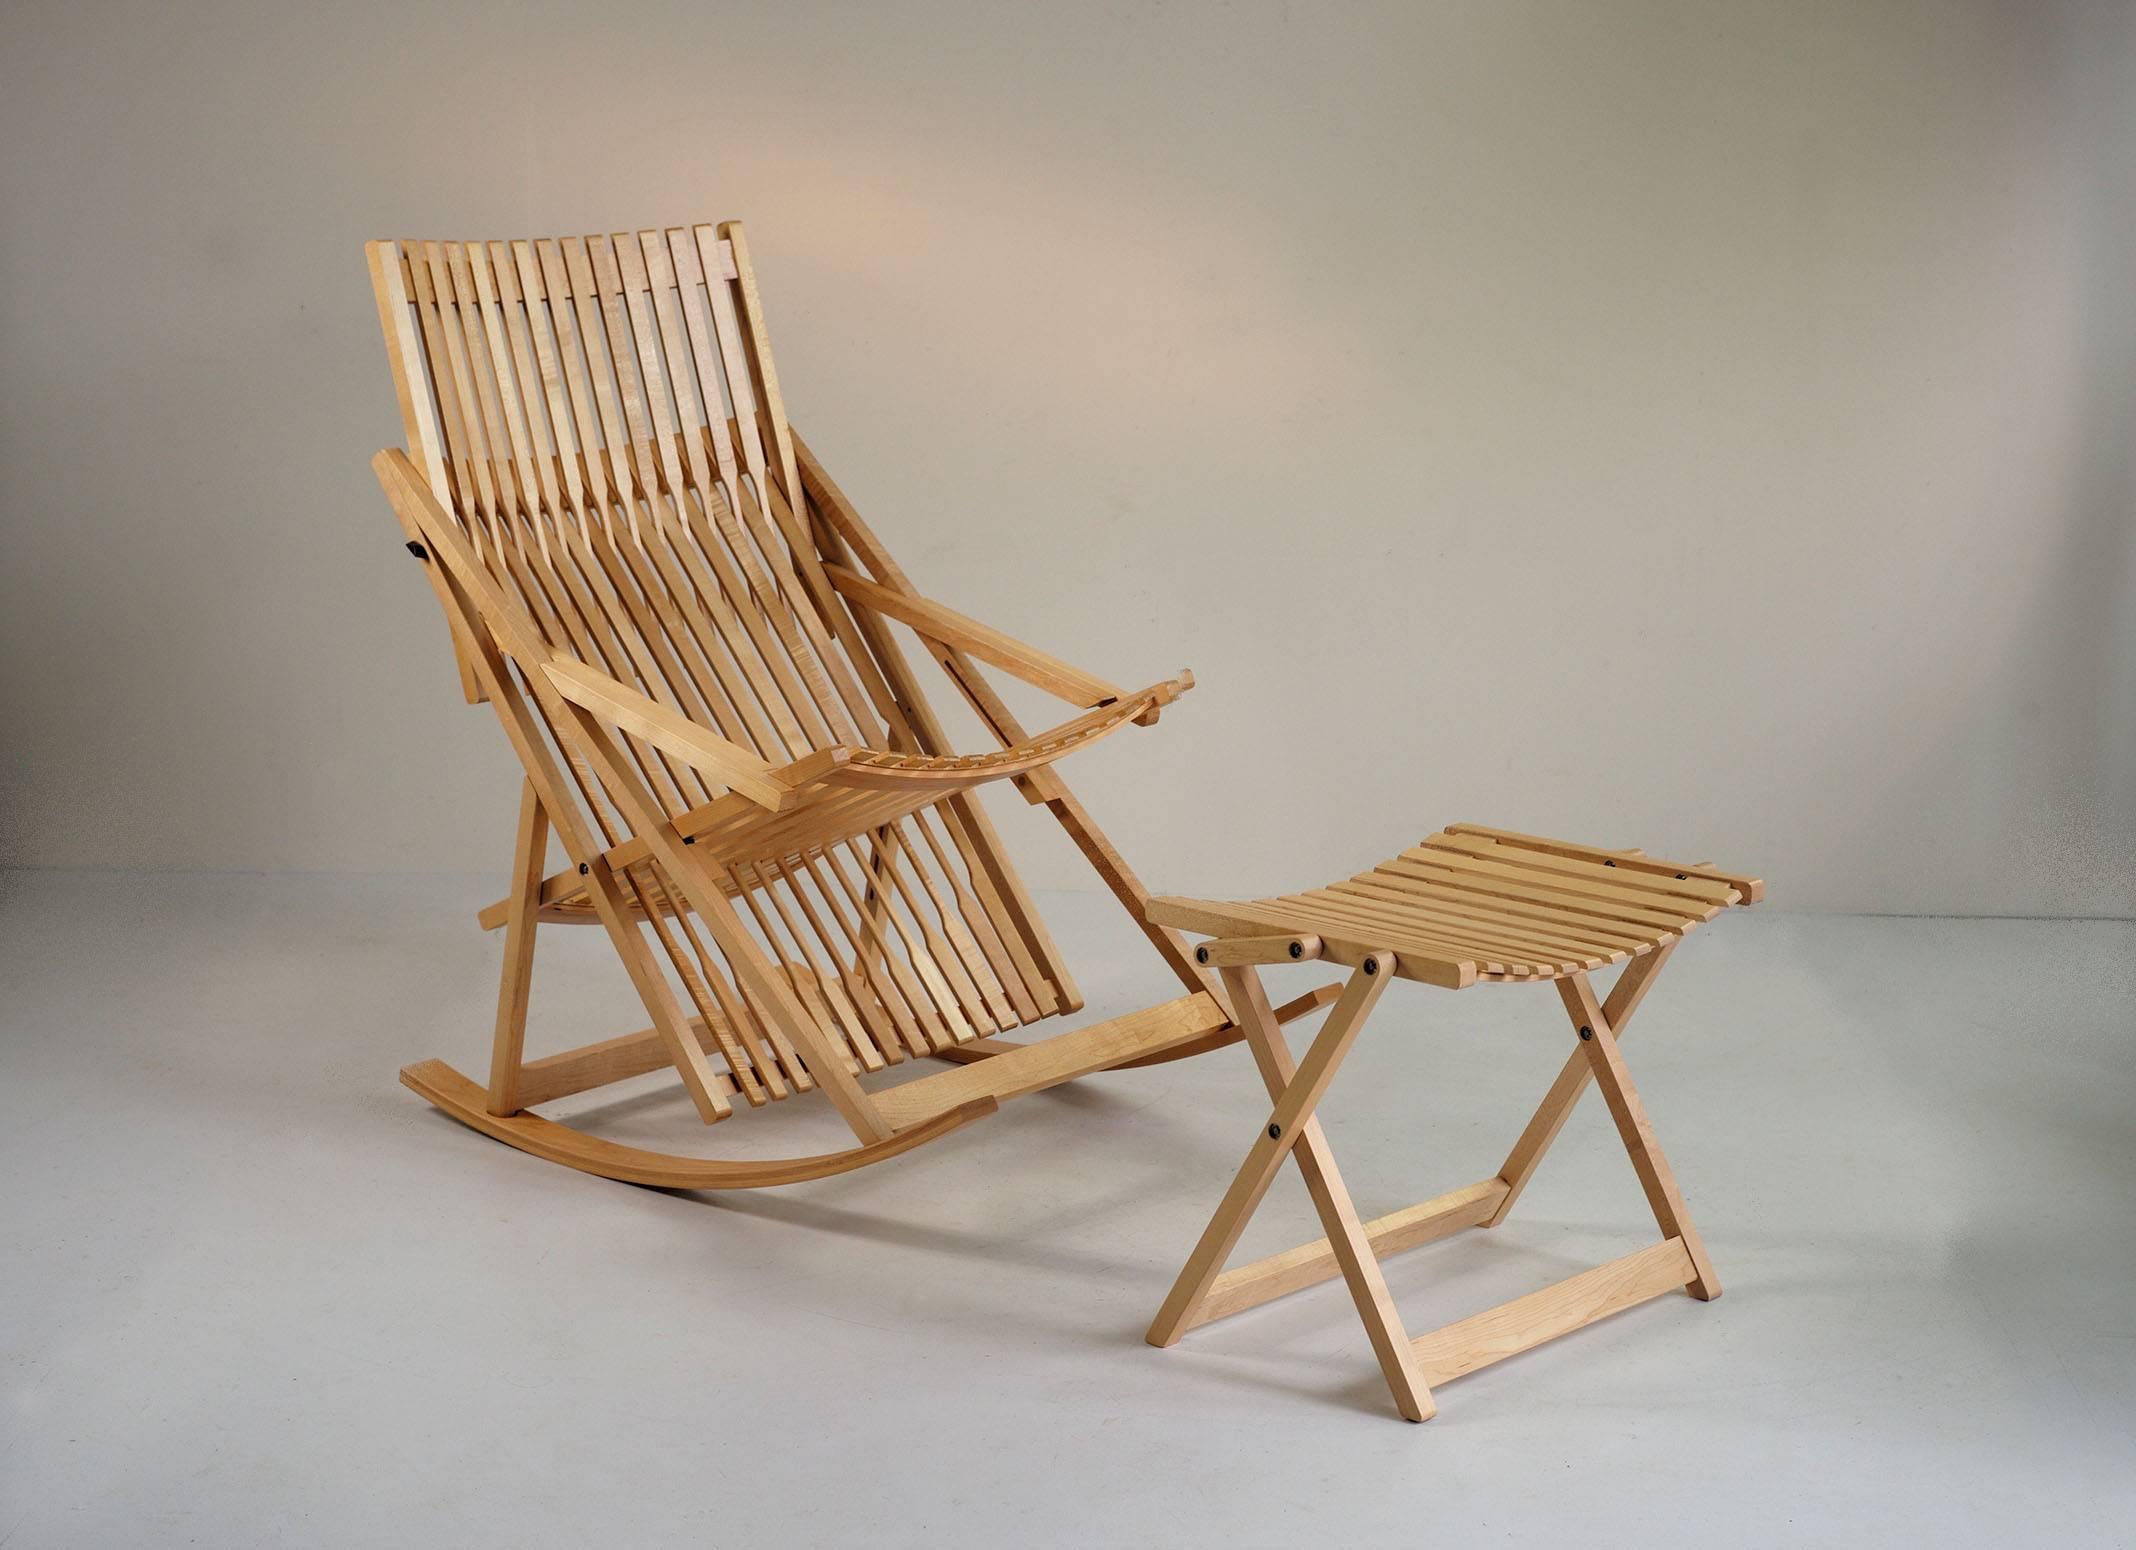 Jean-Claude Duboys, rocking chair and ottoman maple, Attitude edition, France, 1980.
Interior designer, Jean-Claude Duboys designed Program A in maple slats in the 1970s. Started in the 1980s, the edition of this remarkable furniture stops abruptly